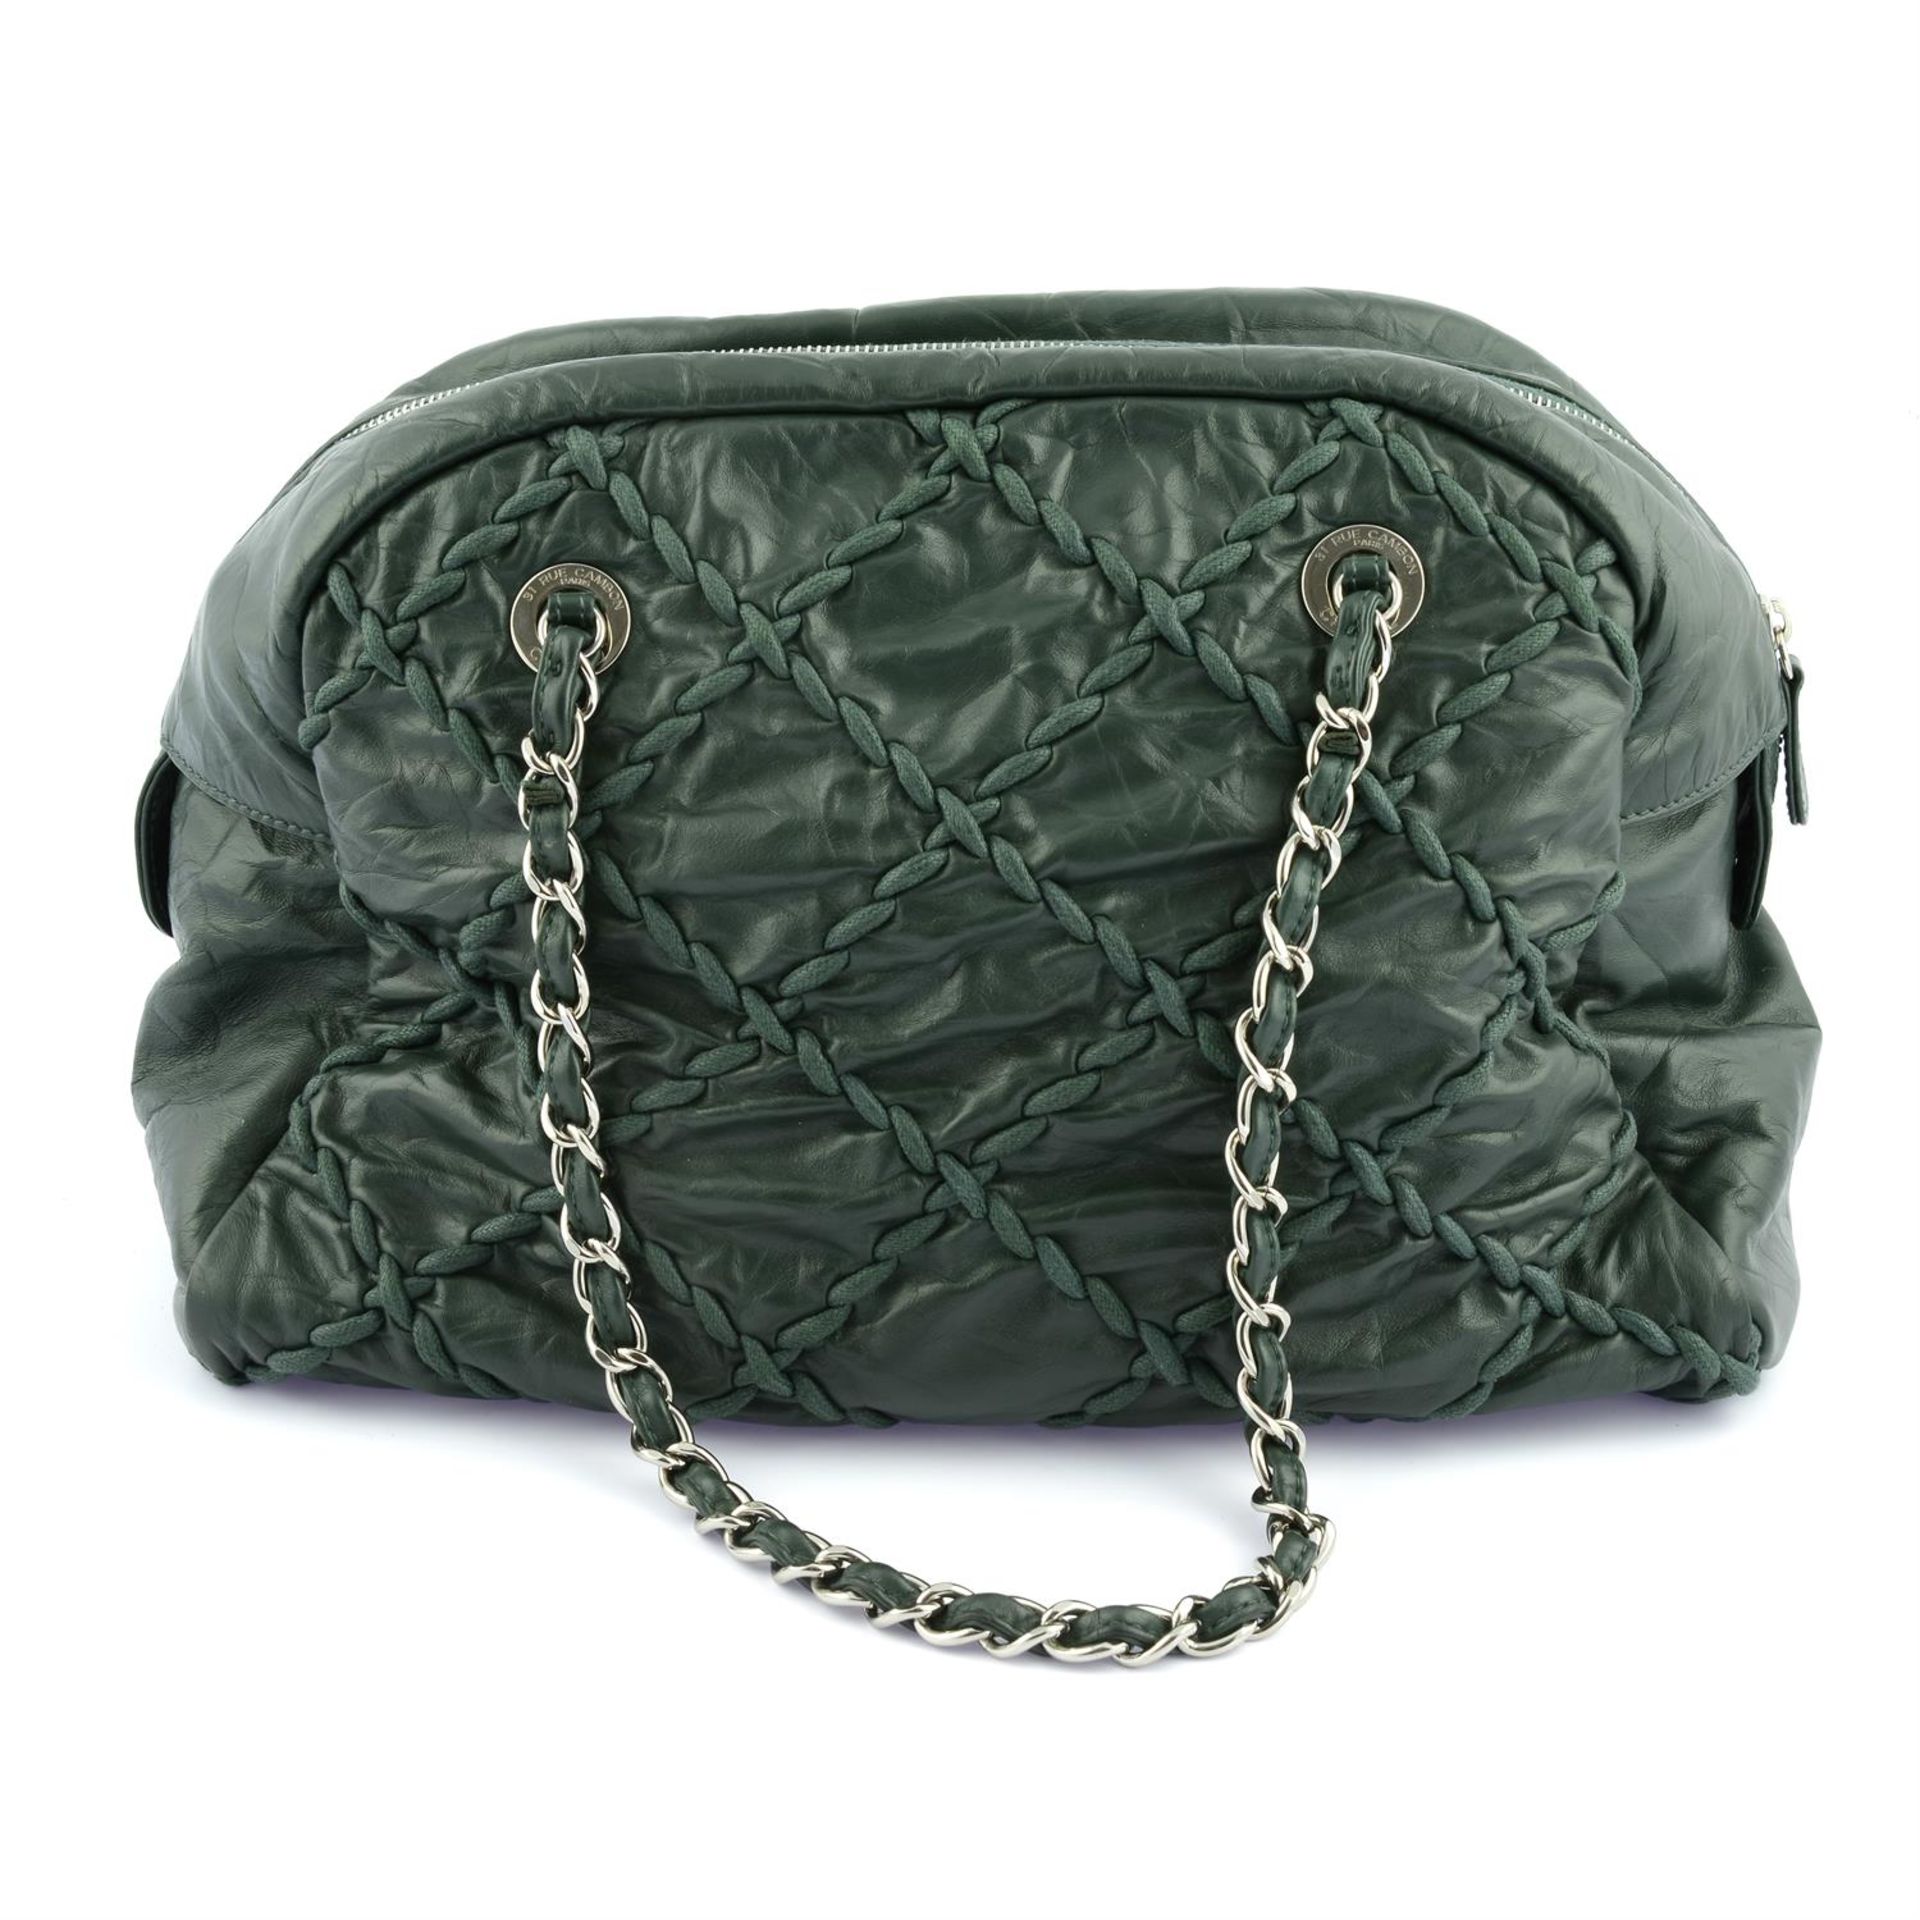 CHANEL - a green crinkled leather Ultra stitch bowling bag. - Image 2 of 4